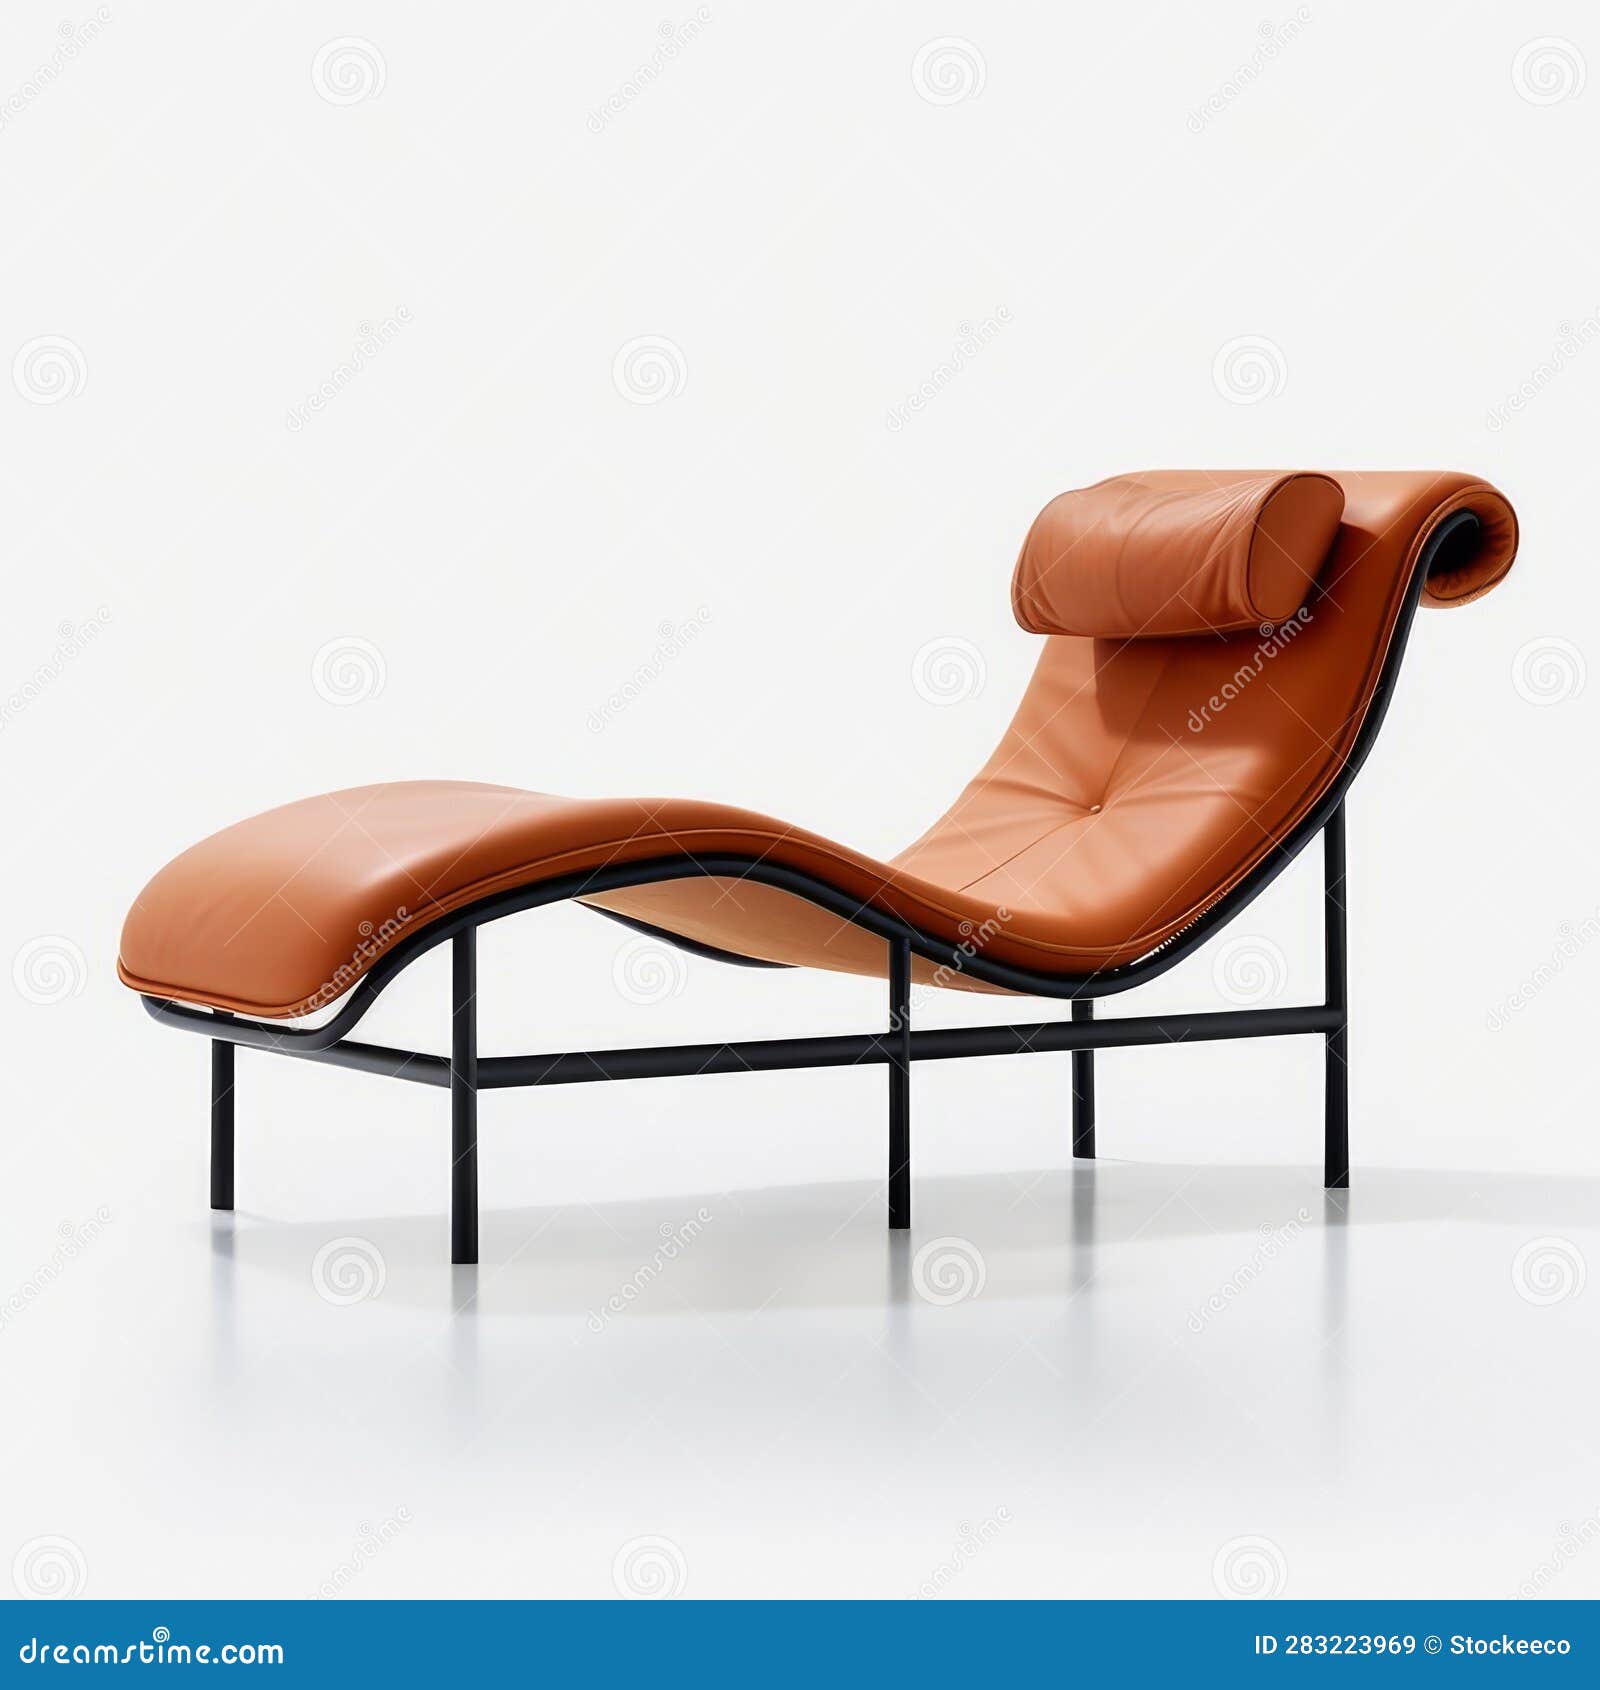 bouroullec leather chaise lounge with black metal frame